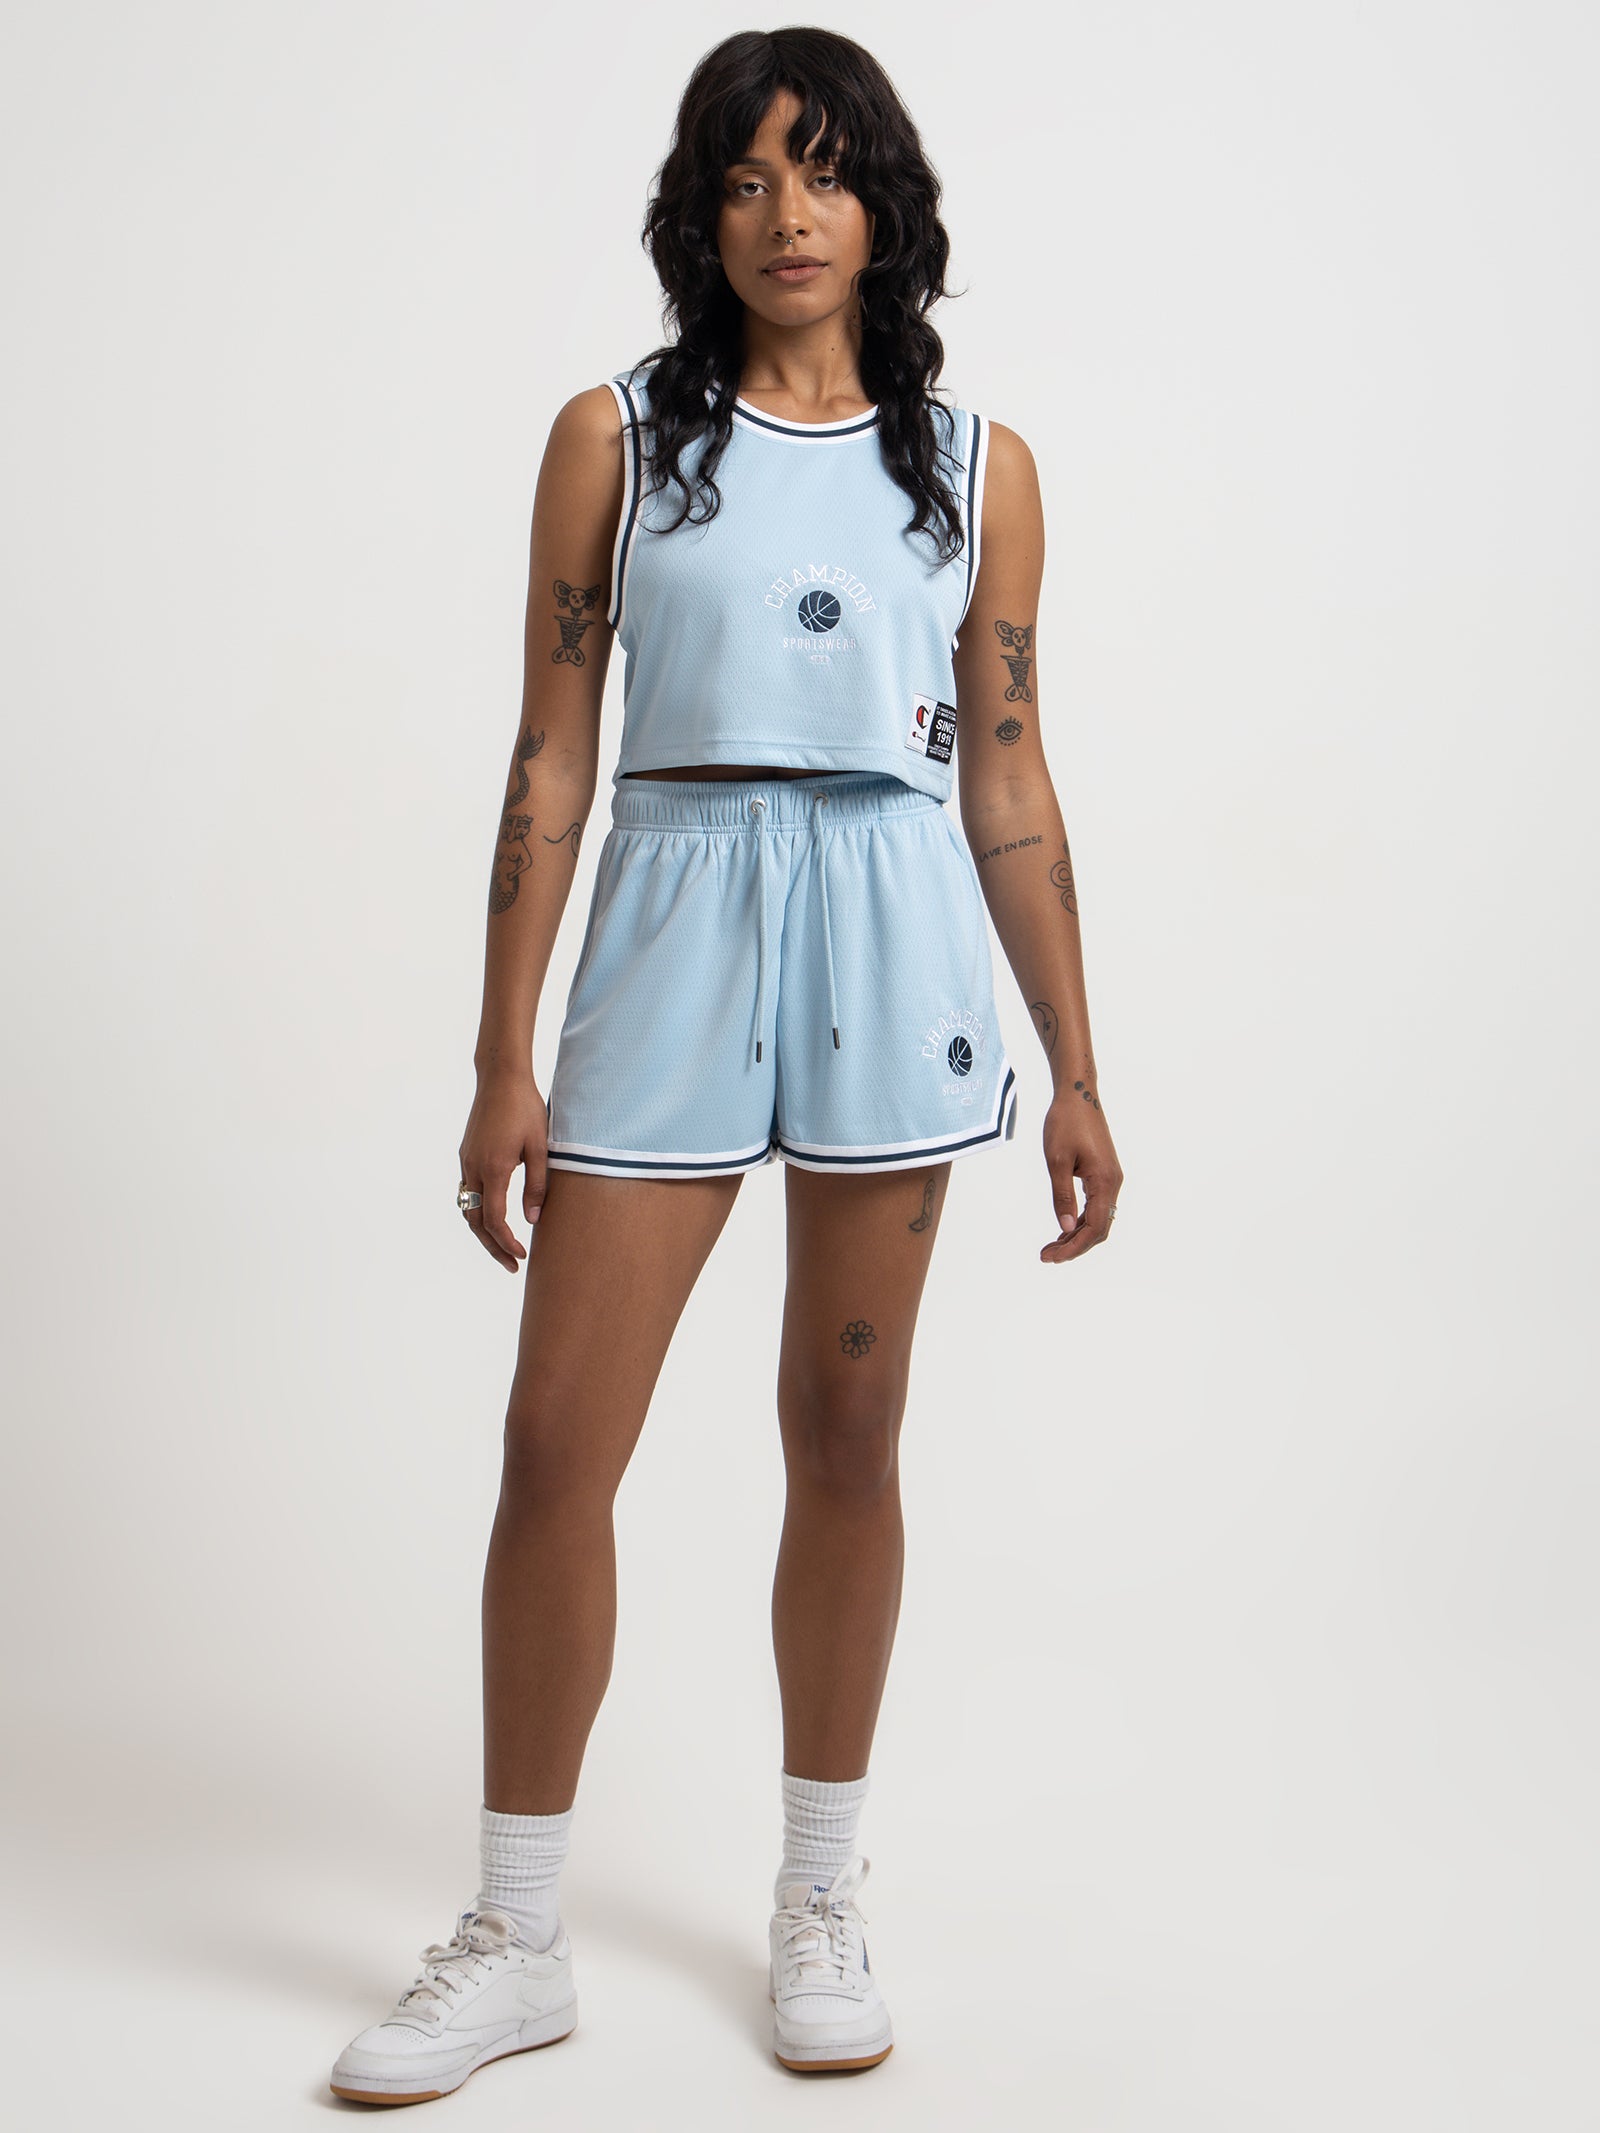 Lifestyle Clubhouse Basketball Crop Jersey in Coastline